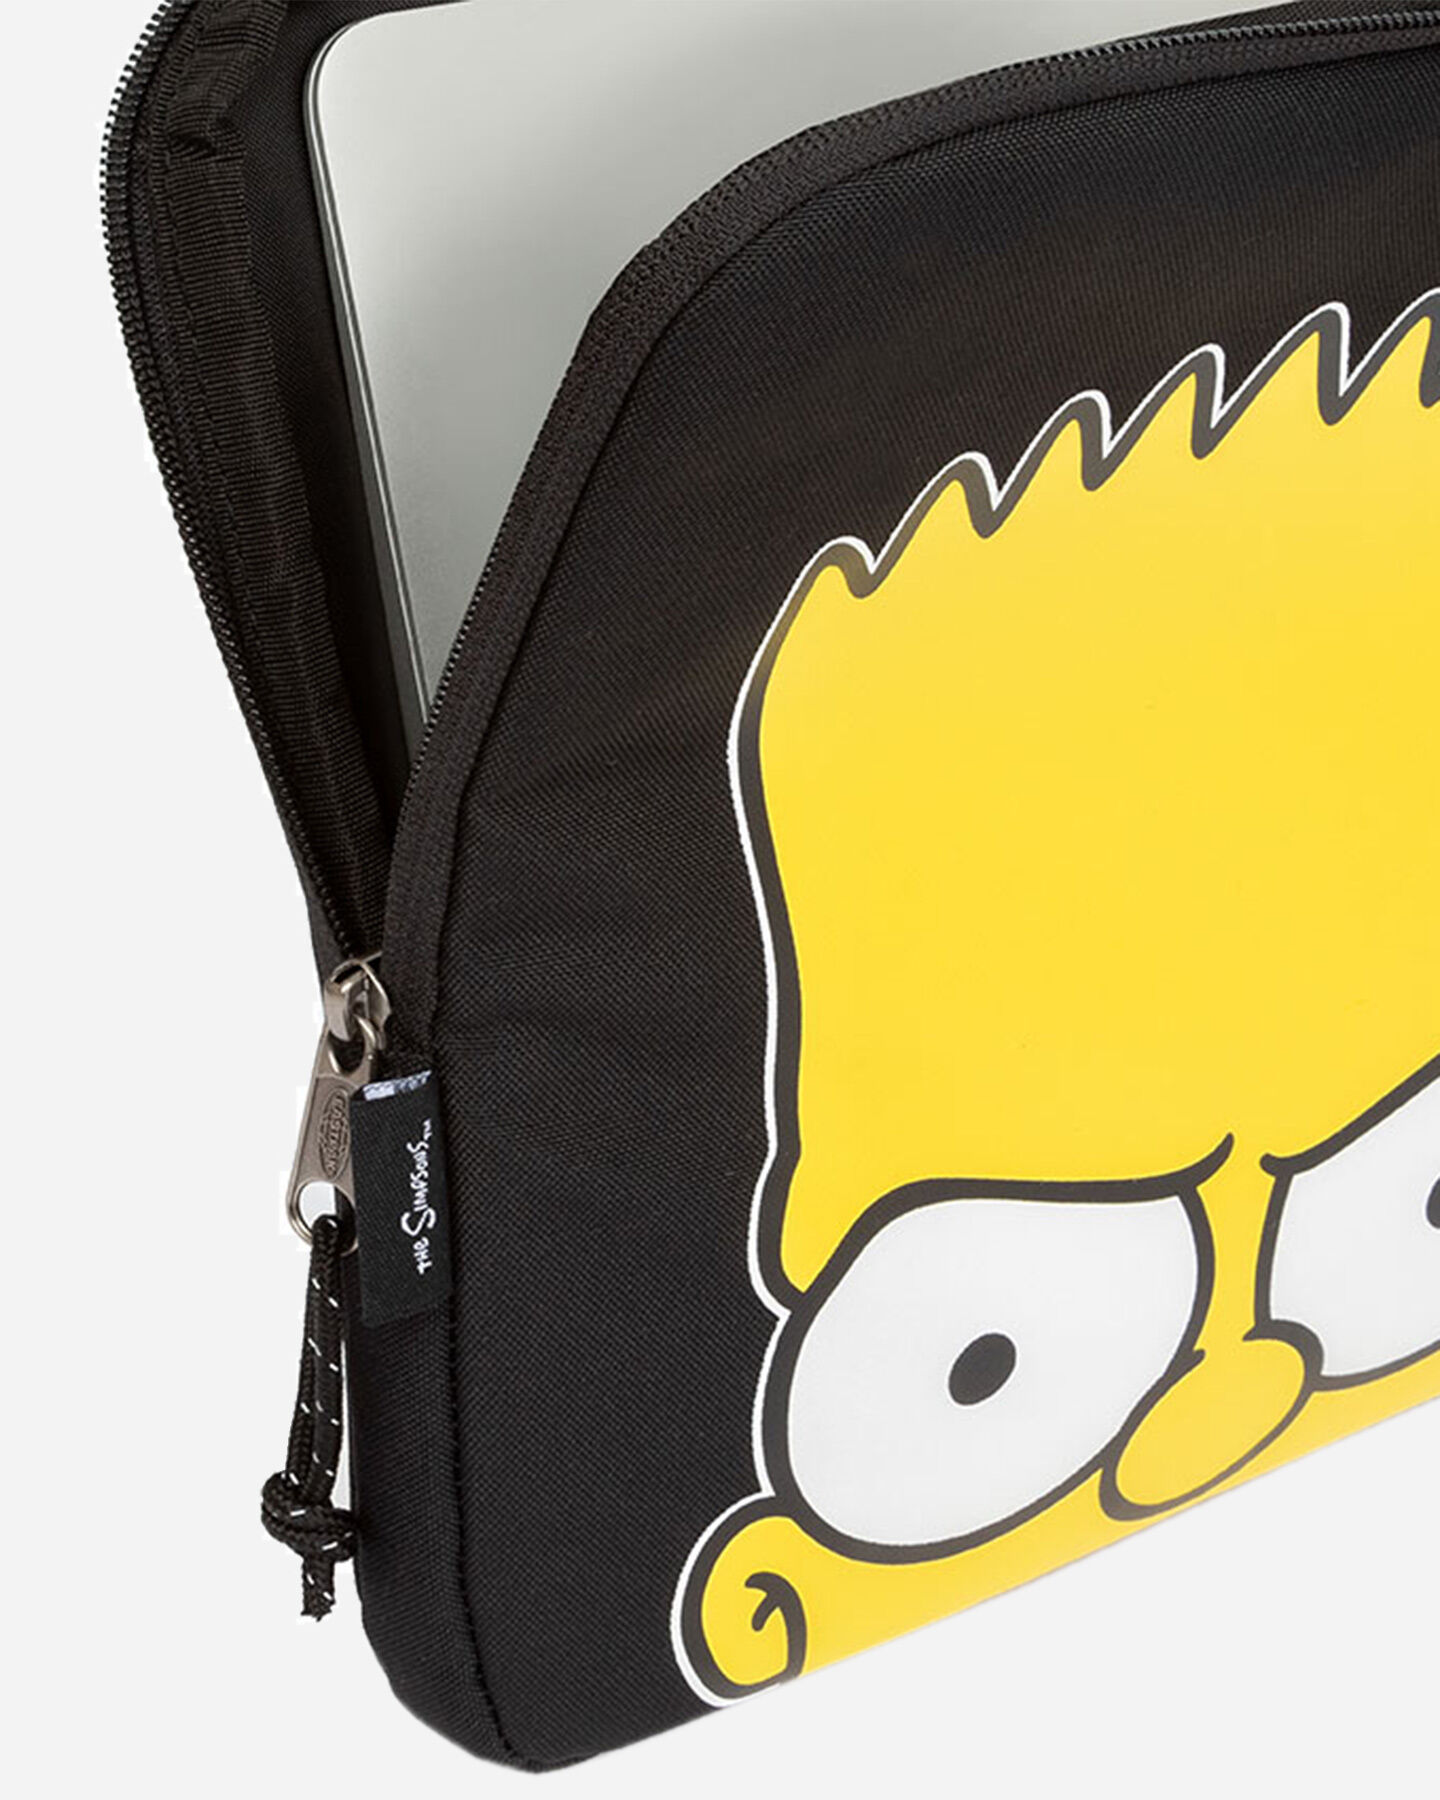  Zaino EASTPAK BLANKET M THE SIMPSONS BART  S5550448|7A3|OS scatto 2